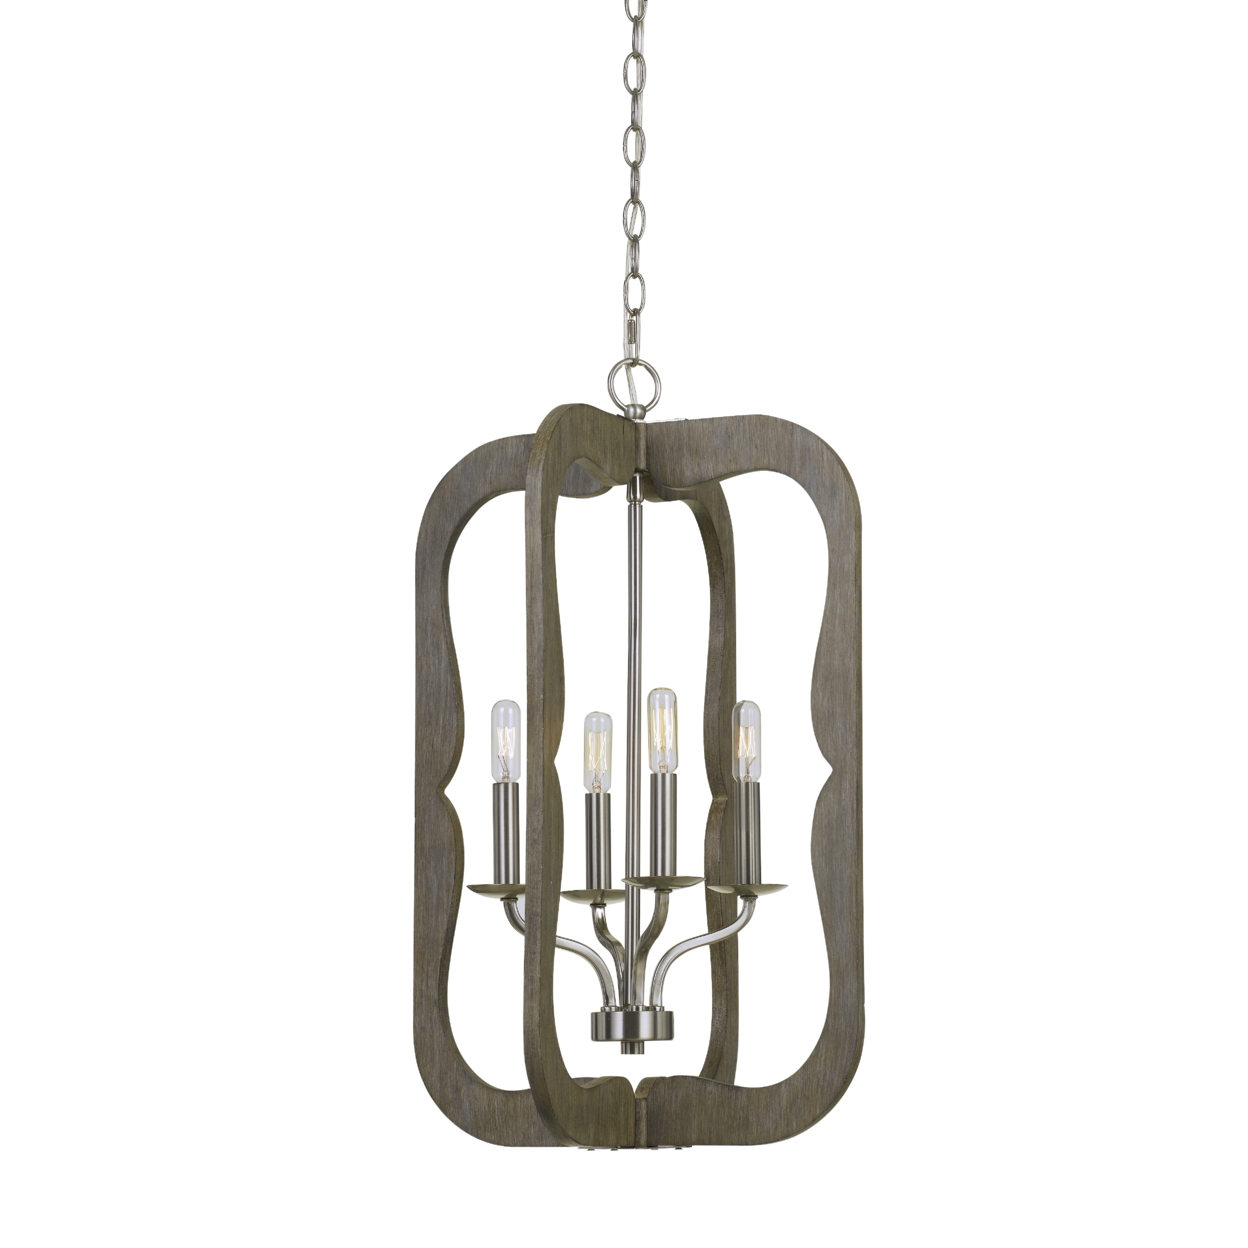 Wooden Cut Out Design Frame Pendant Fixture With Chain, Distressed Brown- Saltoro Sherpi